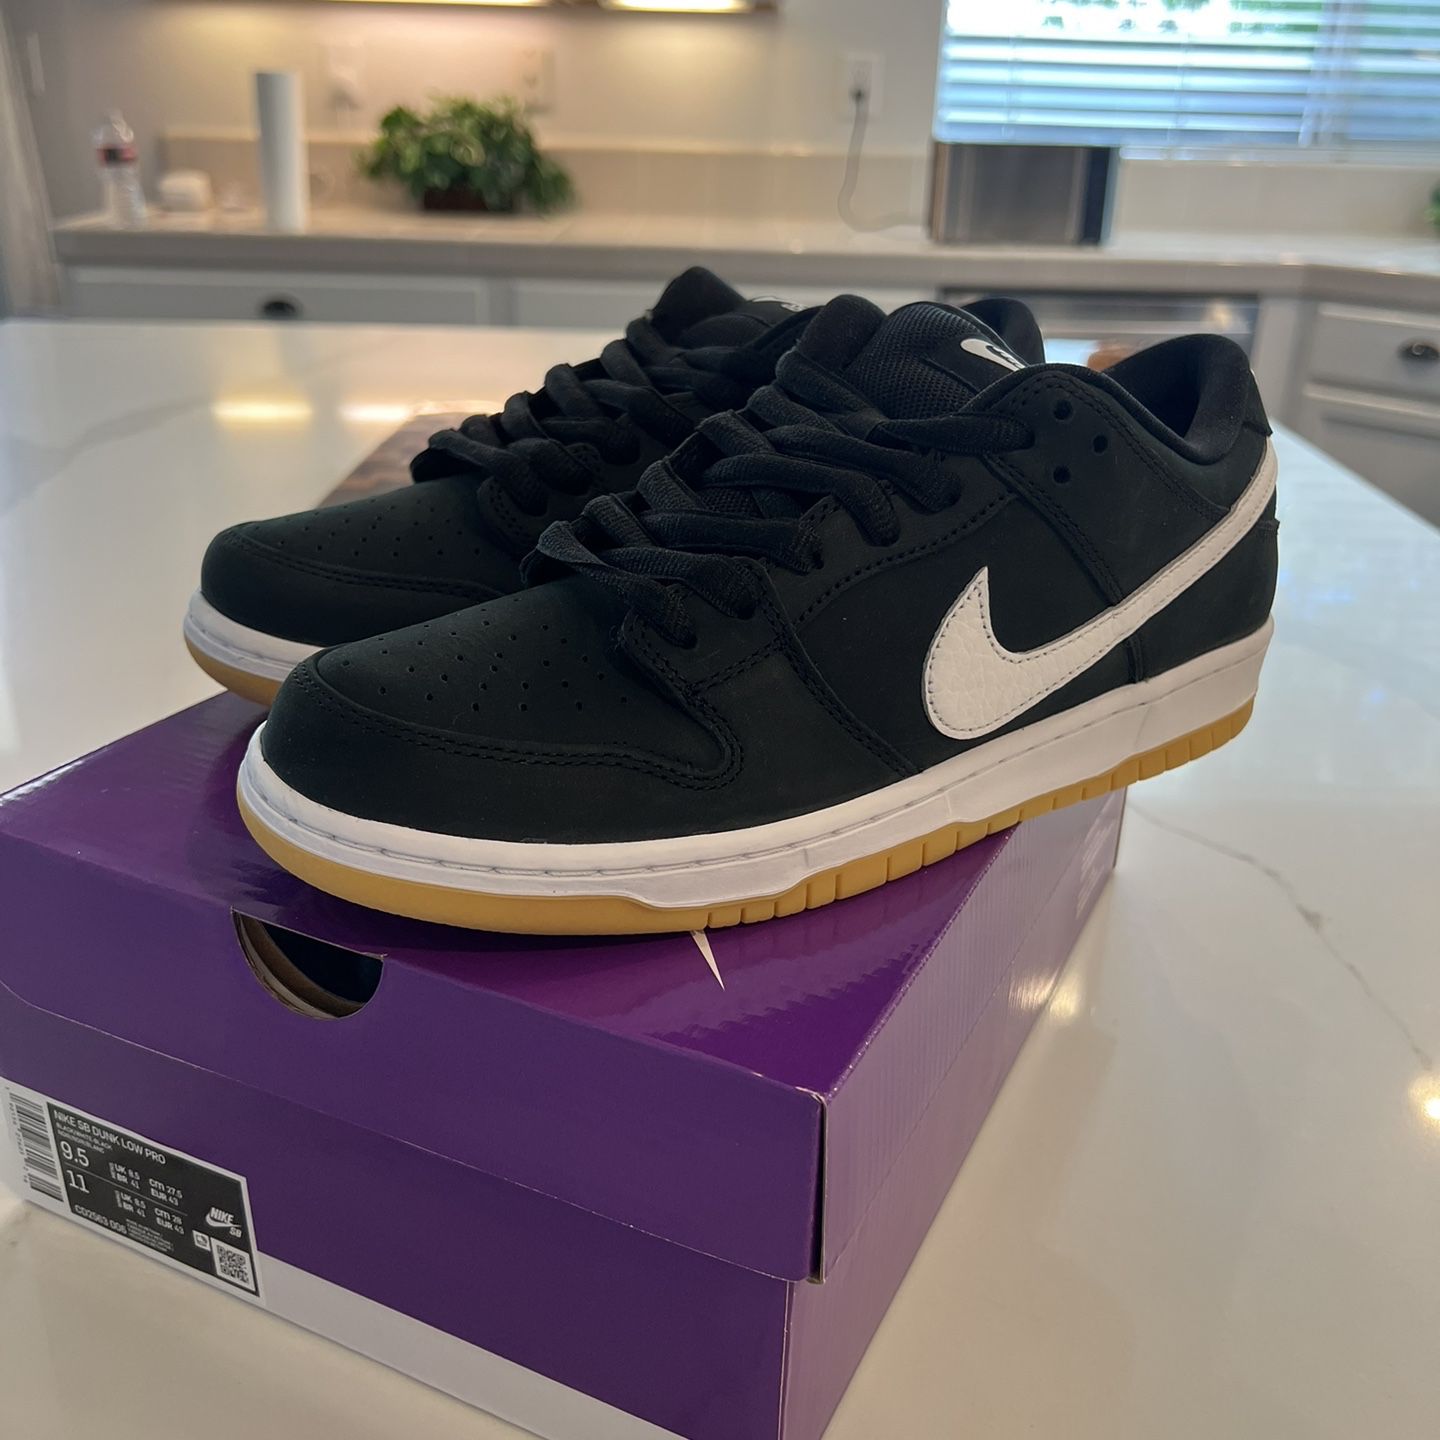 Nike SB Dunk Low Pro Black Gum! Brand New! Size 9.5 for Sale in El ...